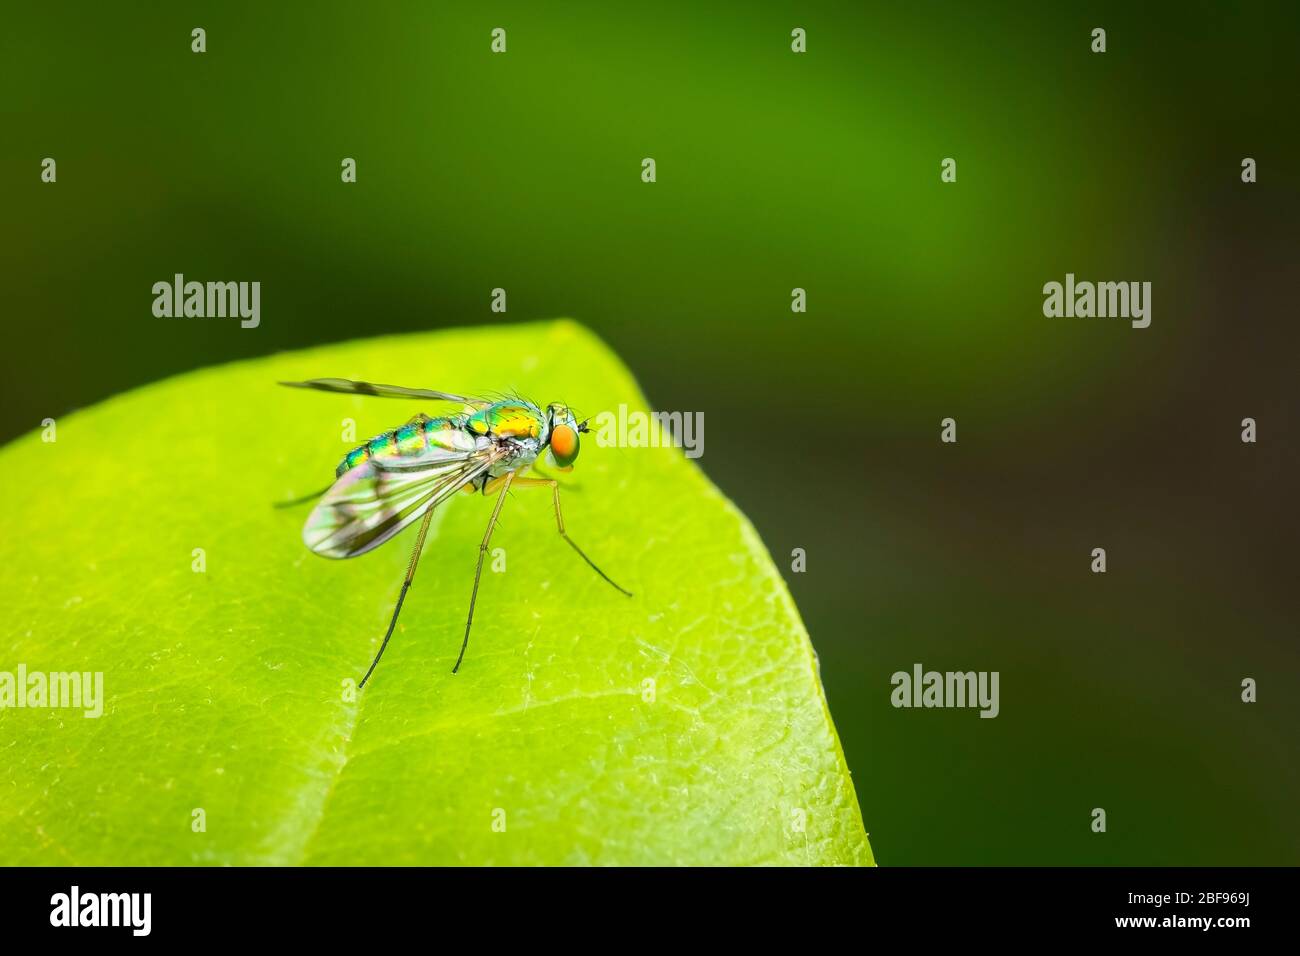 Colorful long-legged fly resting on a green leaf with a blurred background Stock Photo